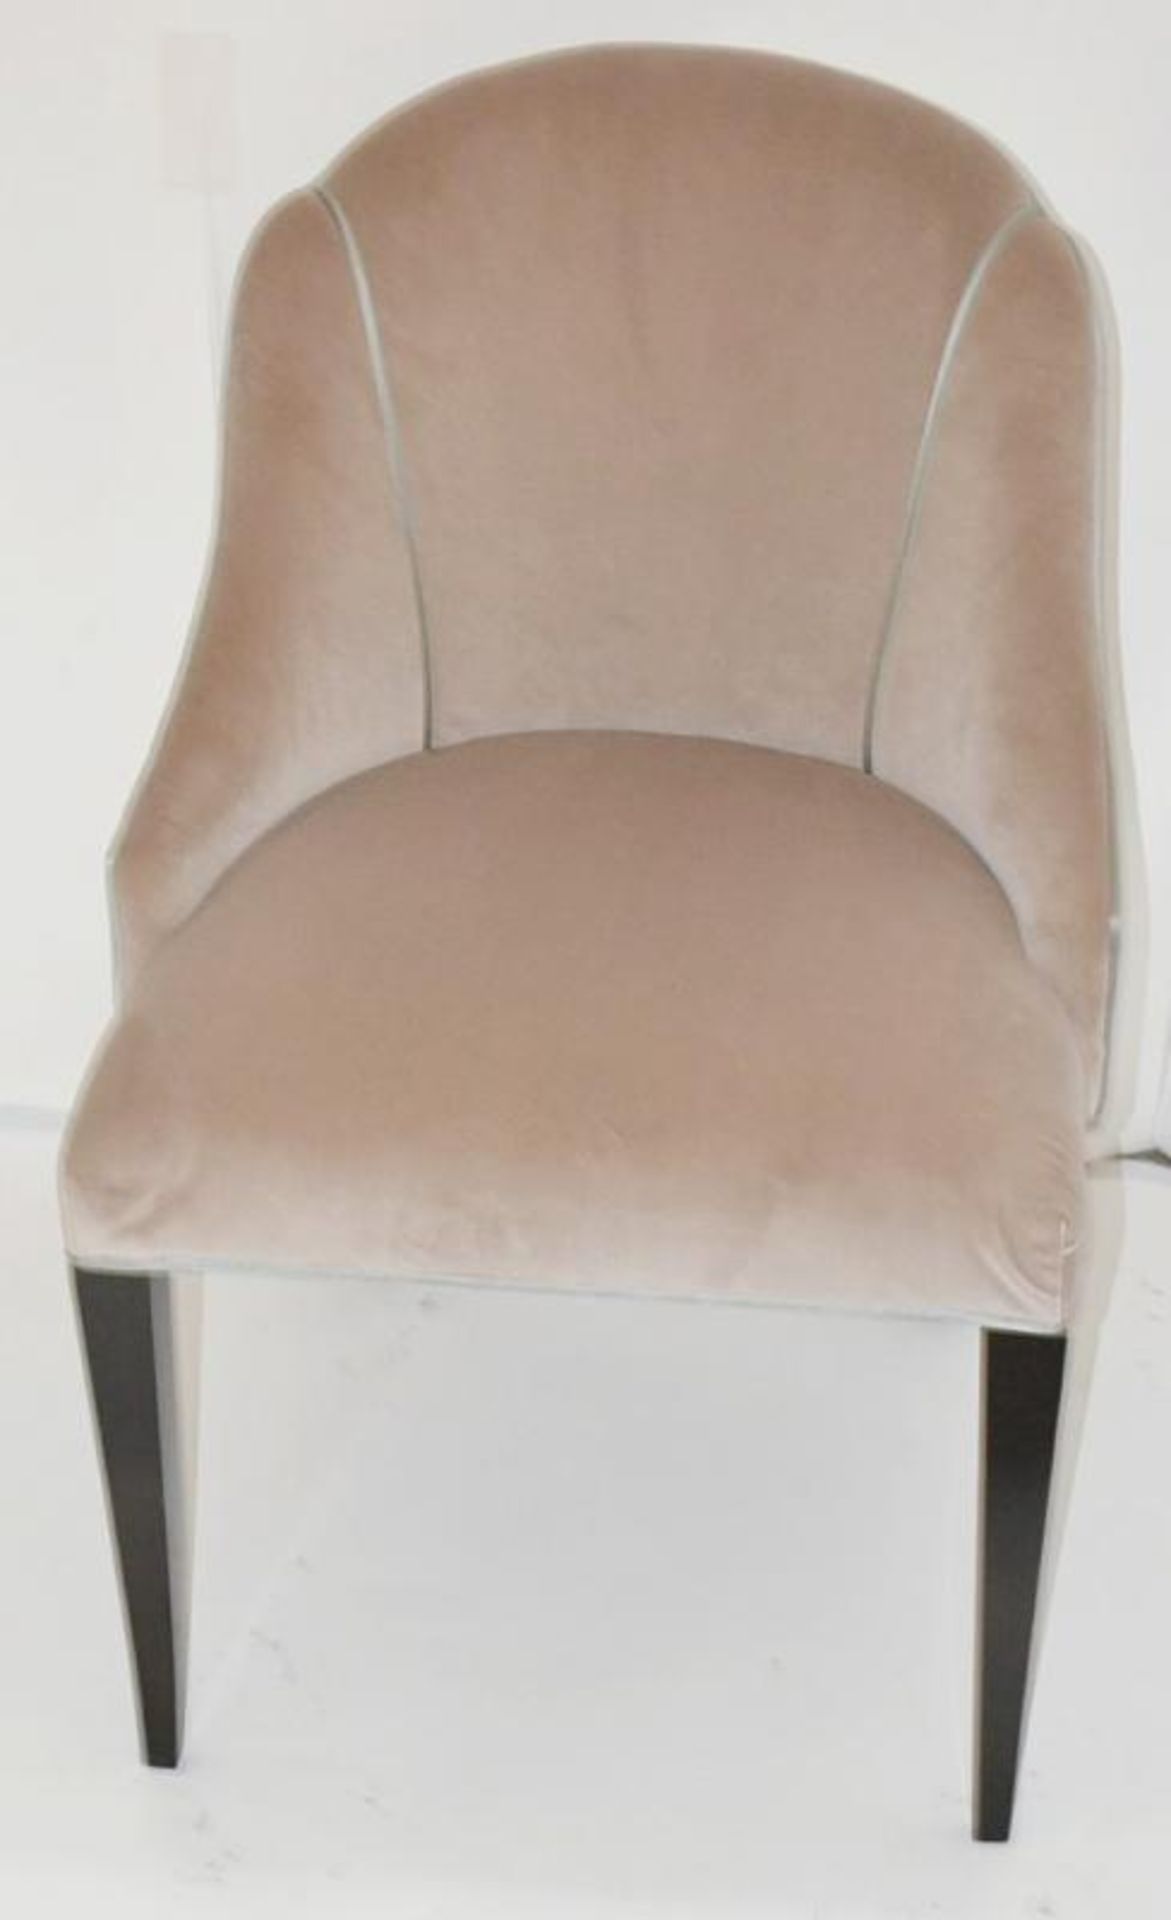 1 x REED &amp; RACKSTRAW "Cloud" Velvet Upholstered Handcrafted Chair - Dimensions: H87 x W58 x D5 - Image 5 of 12